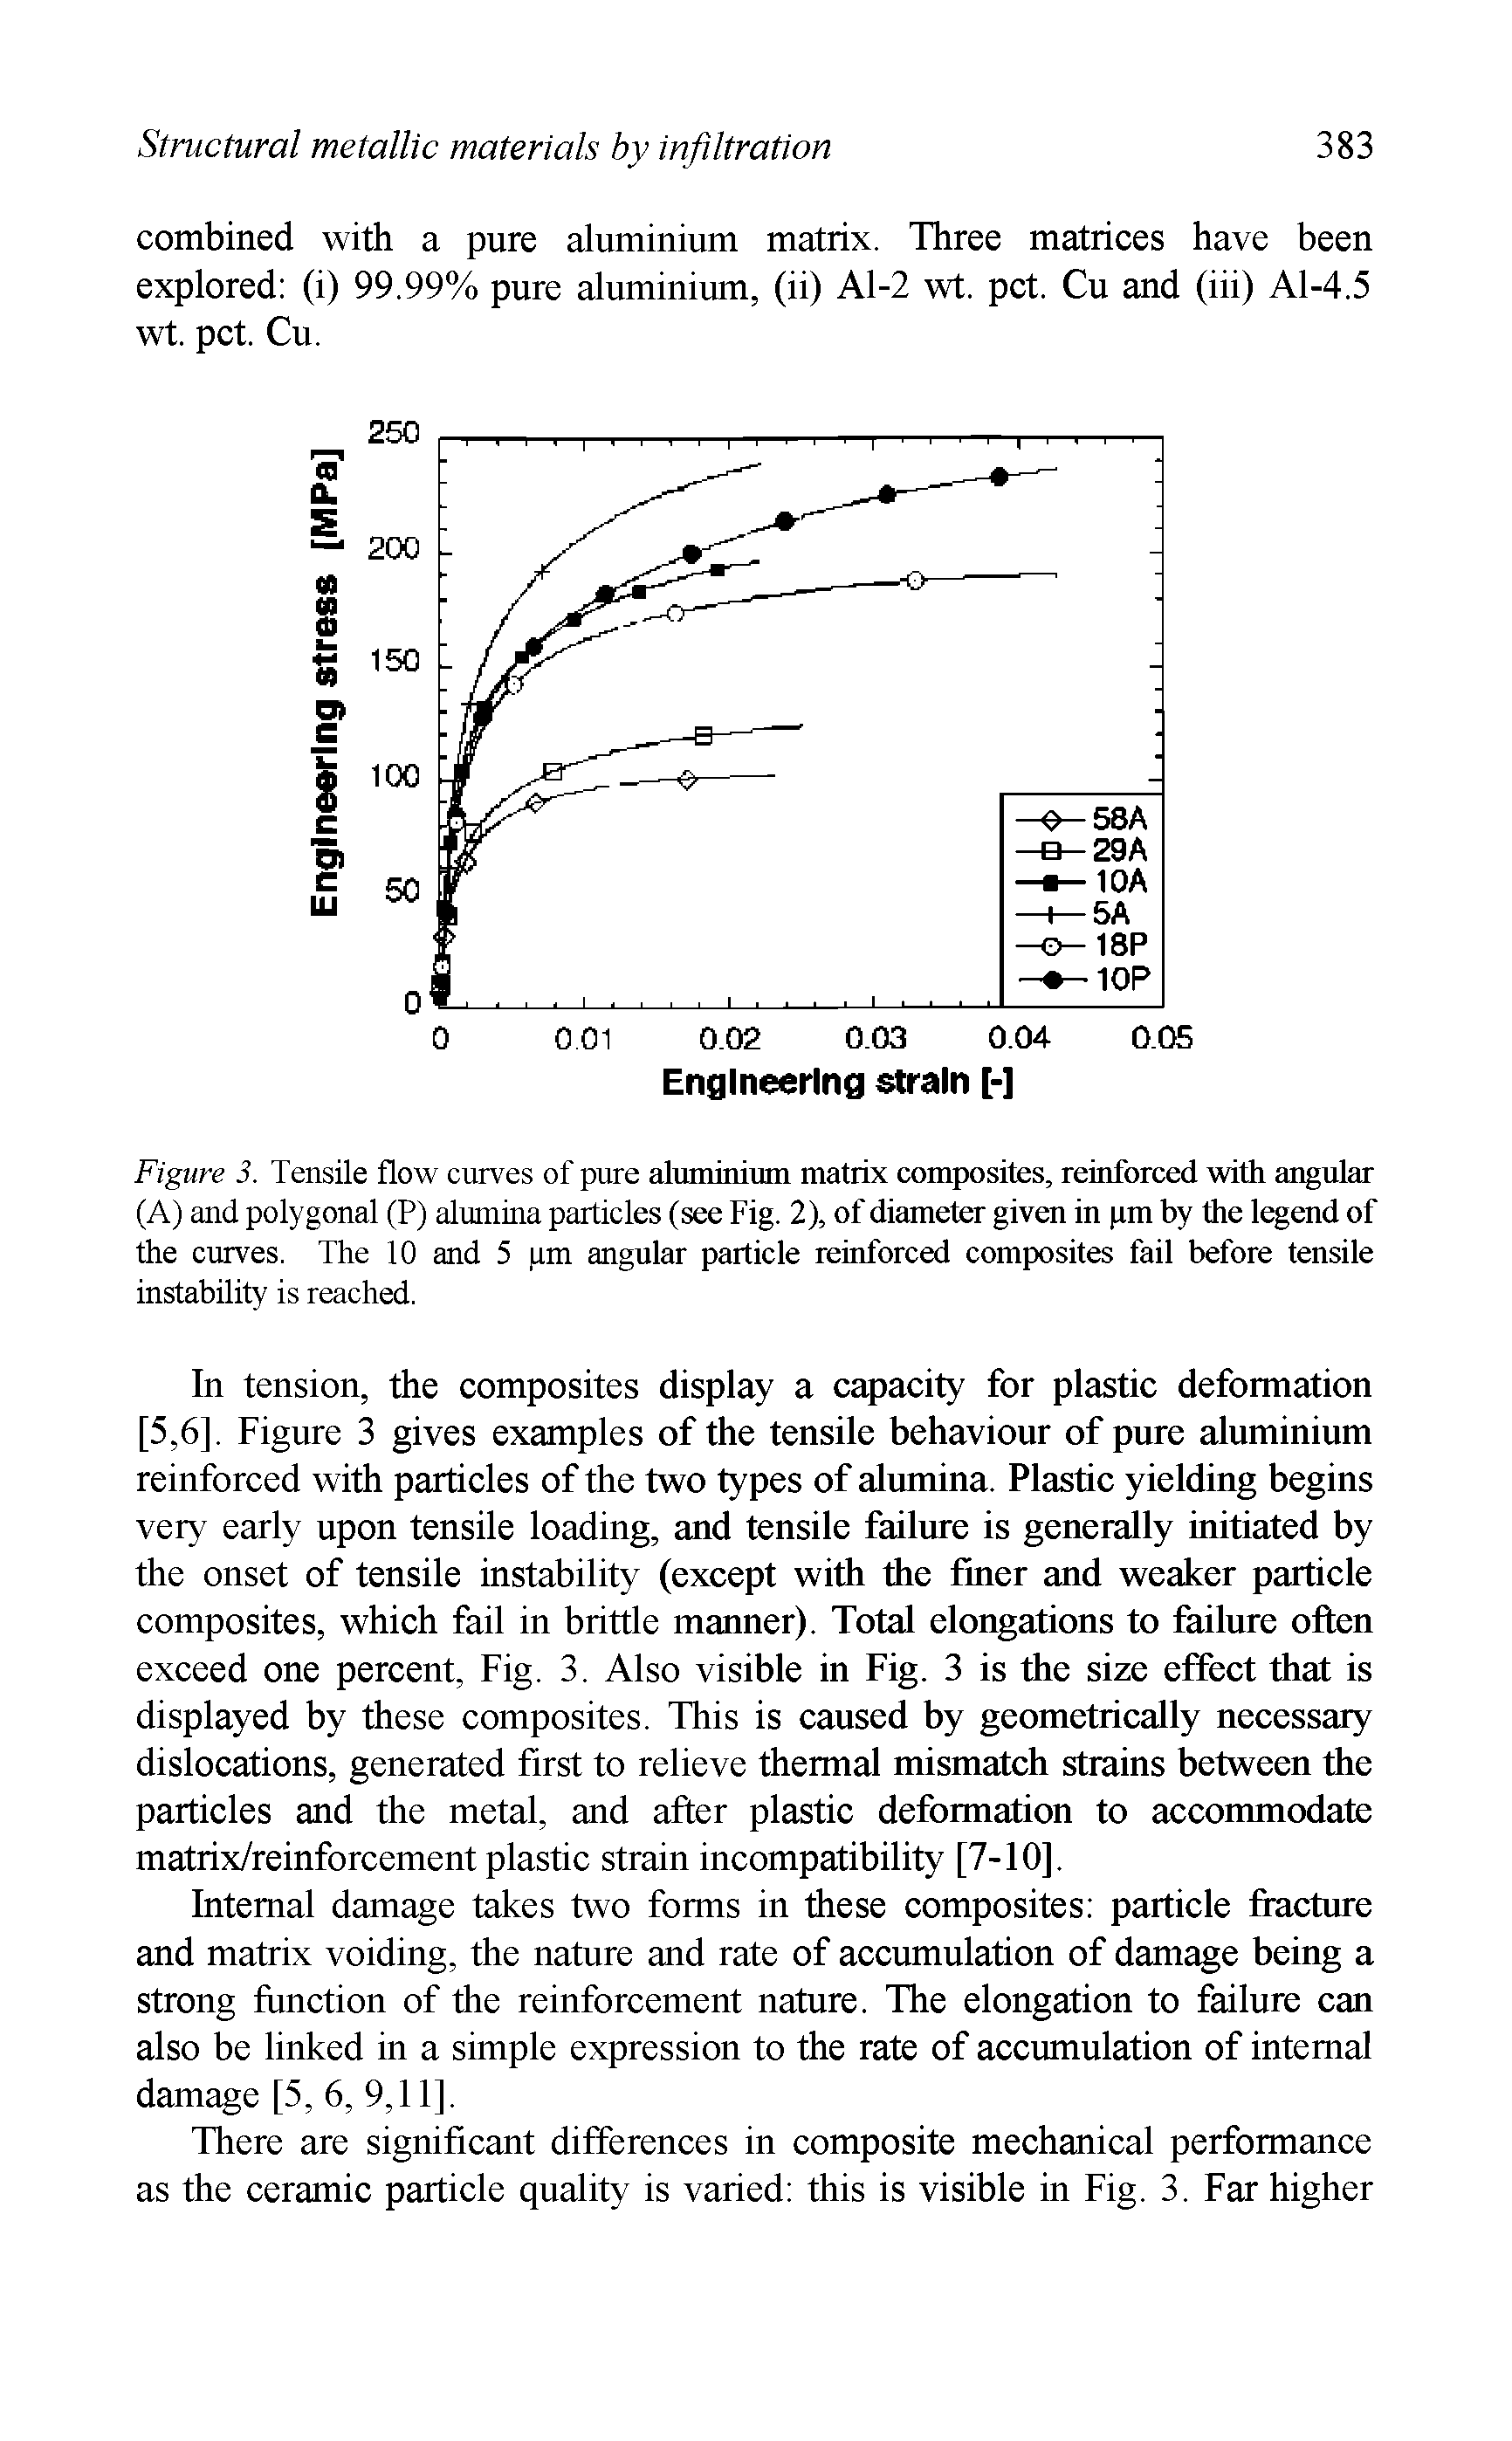 Figure 3. Tensile flow curves of pure aluminium matrix composites, reinforced with angular (A) and polygonal (P) alumina particles (see Fig. 2), of diameter given in pm by the legend of the curves. The 10 and 5 pm angular particle reinforced composites fail before tensile instability is reached.